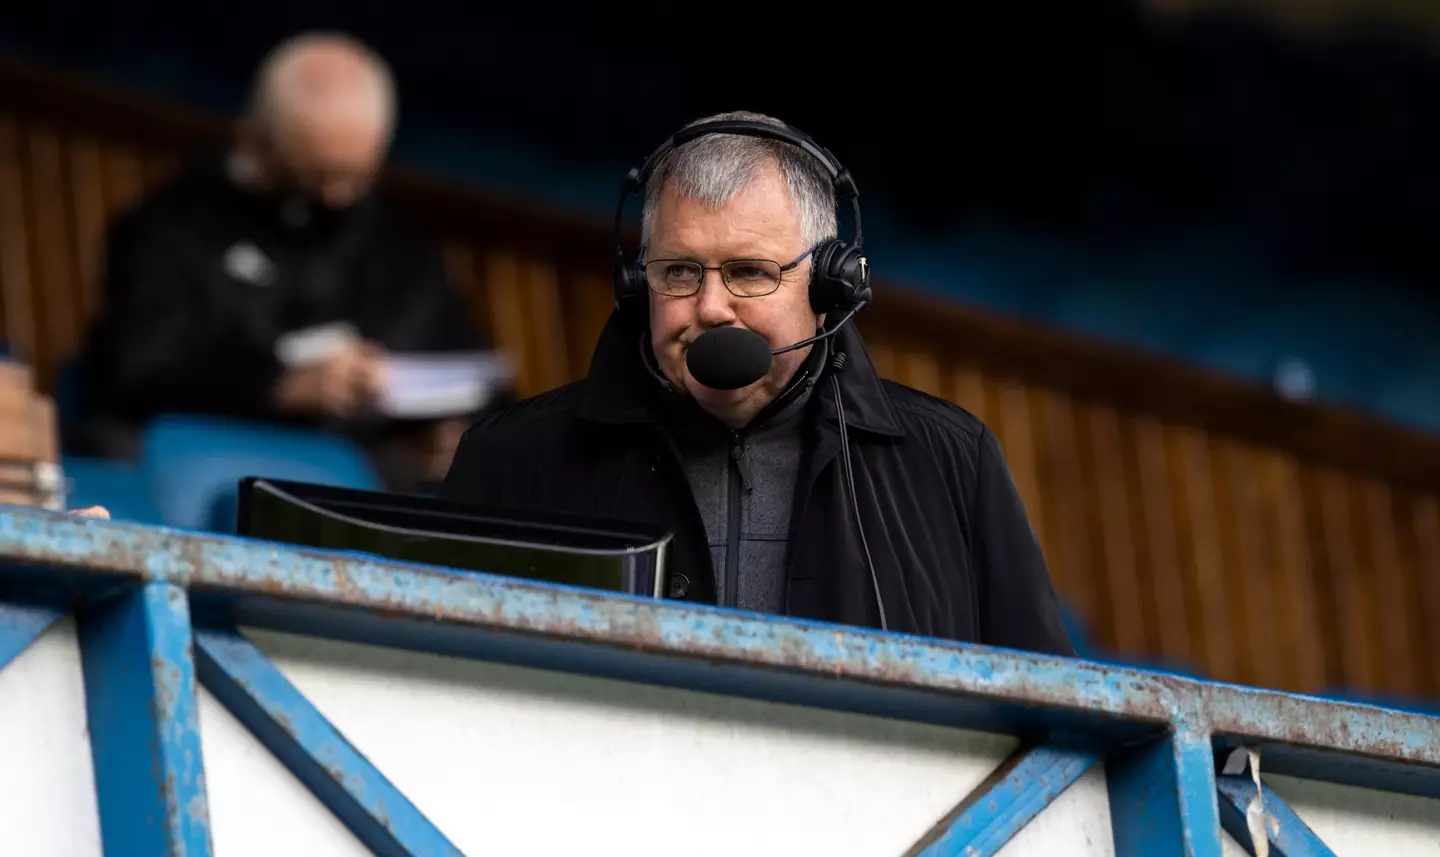 Clive Tyldesley has announced a new job at a major broadcaster (Getty)